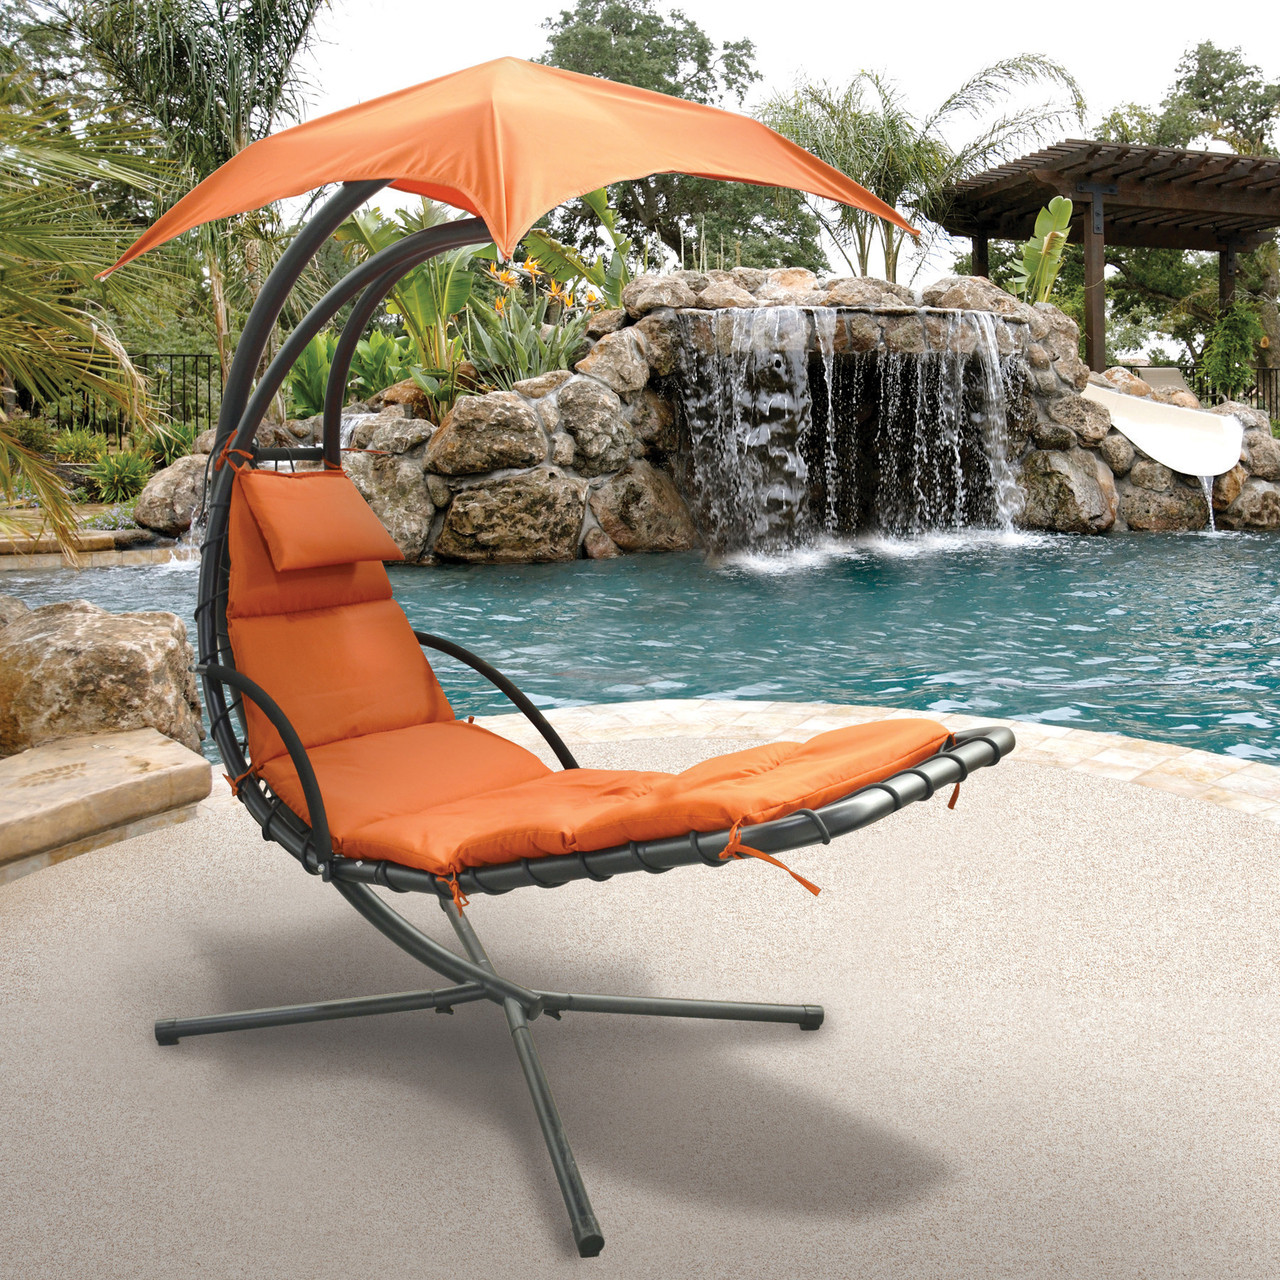 OUTDOOR CHAIRS AND LOUNGERS